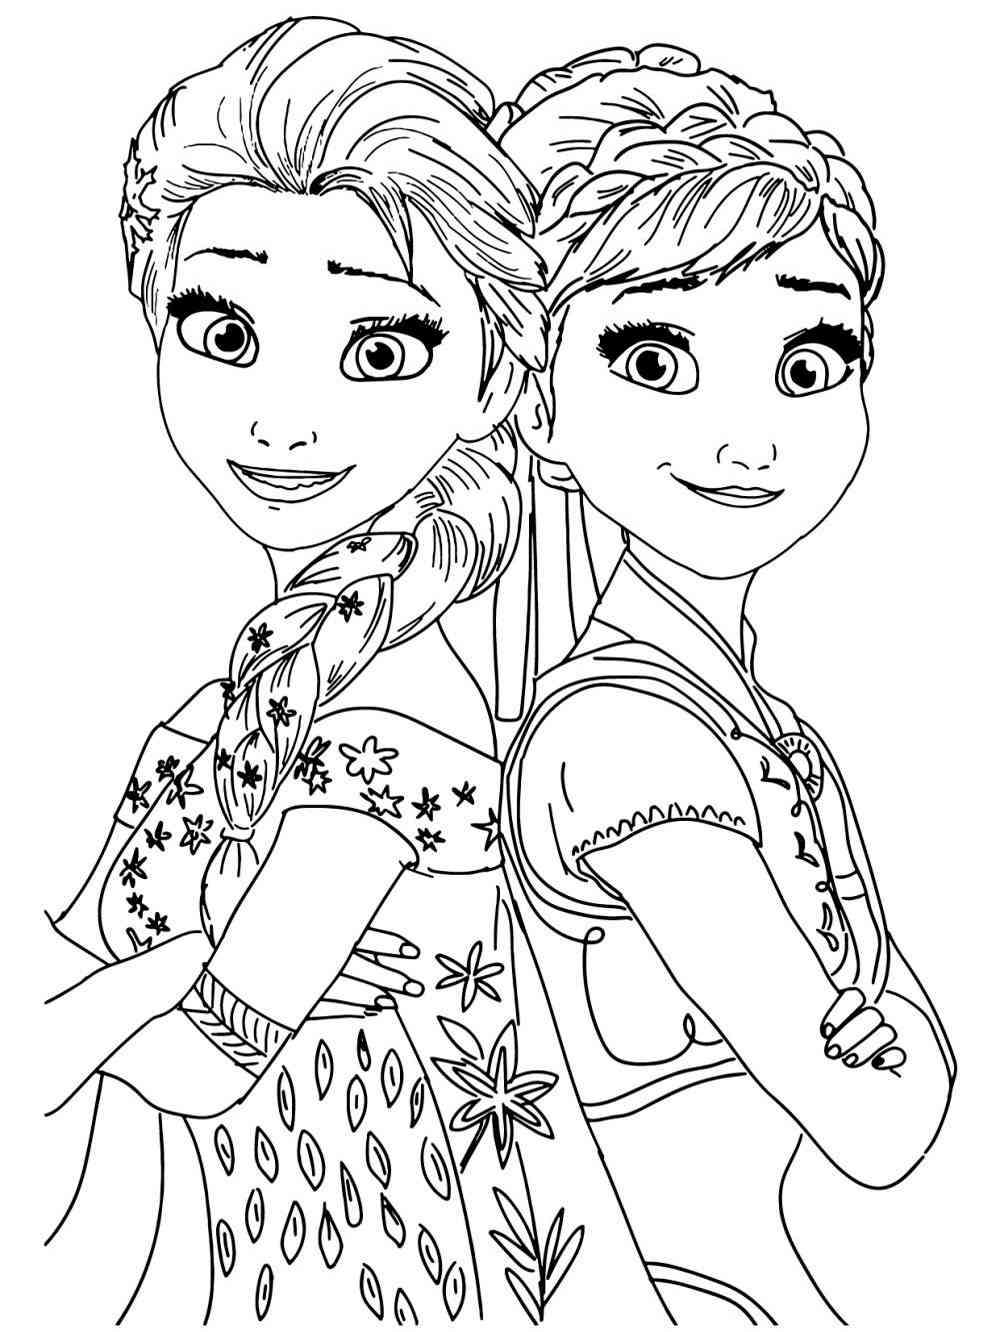 Elsa and Anna 7 coloring page